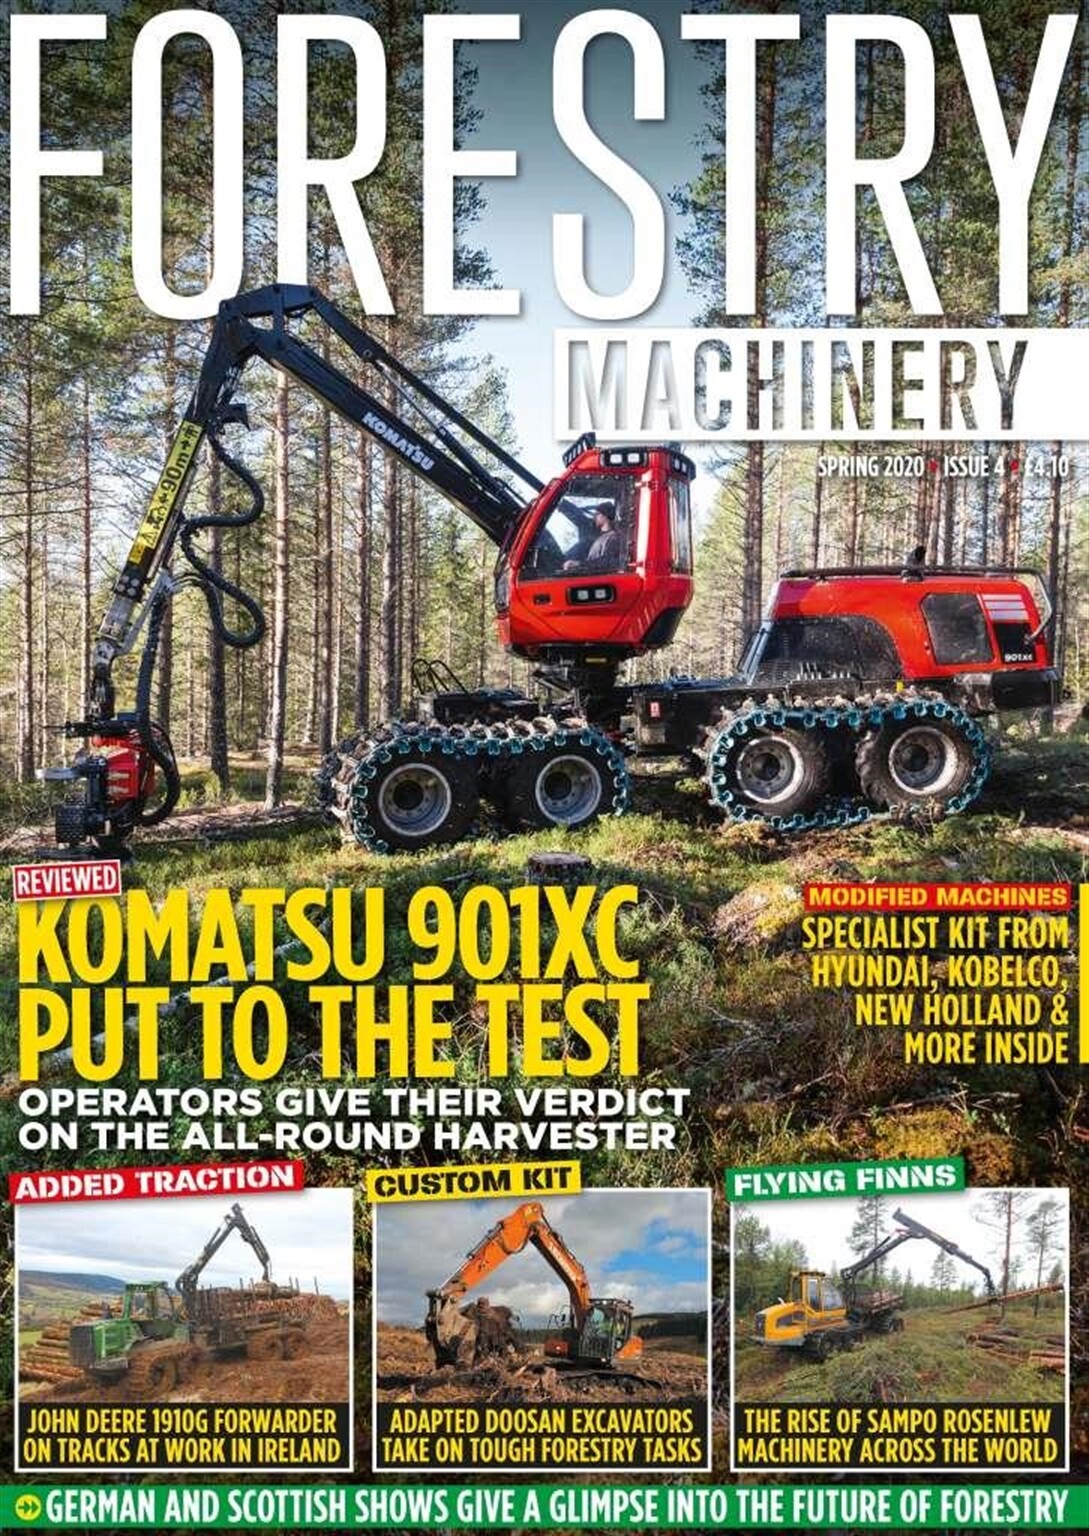 Forestry Machinery issue 4 OUT NOW!